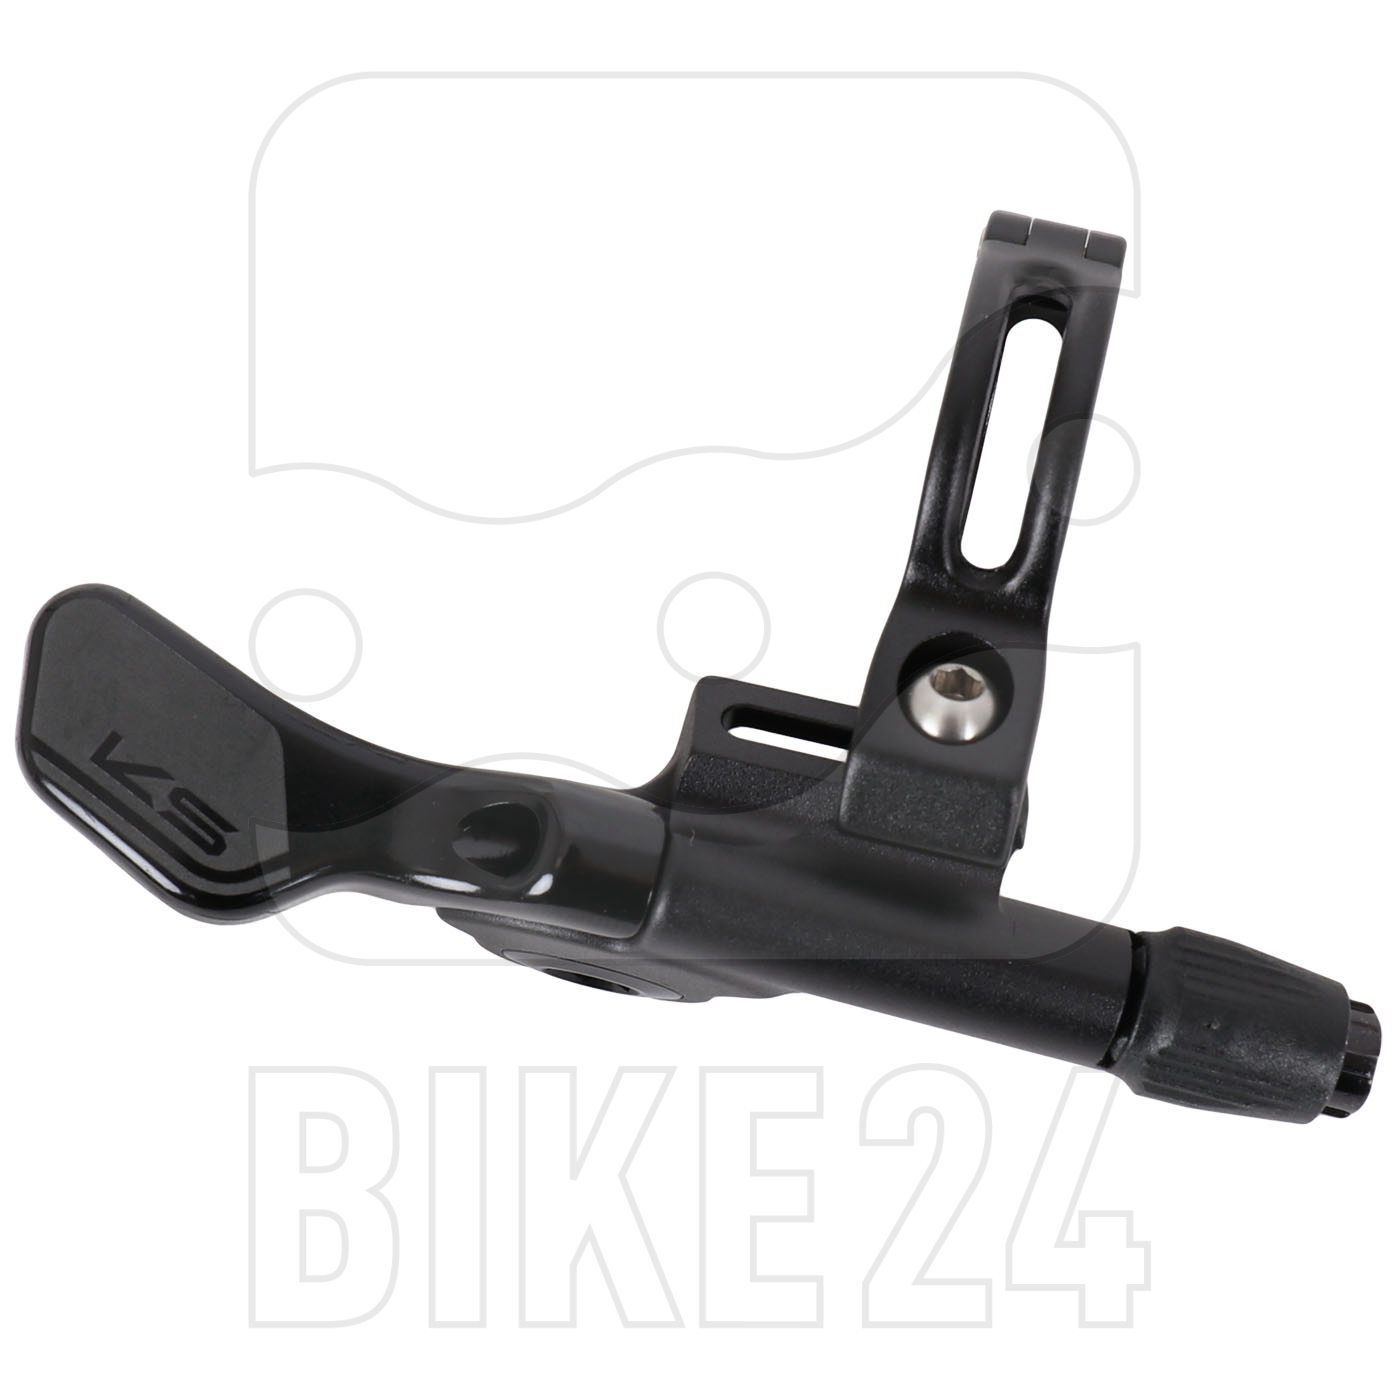 Productfoto van KS Southpaw Alloy Remote - Traditional - for 22.2mm bar clamp